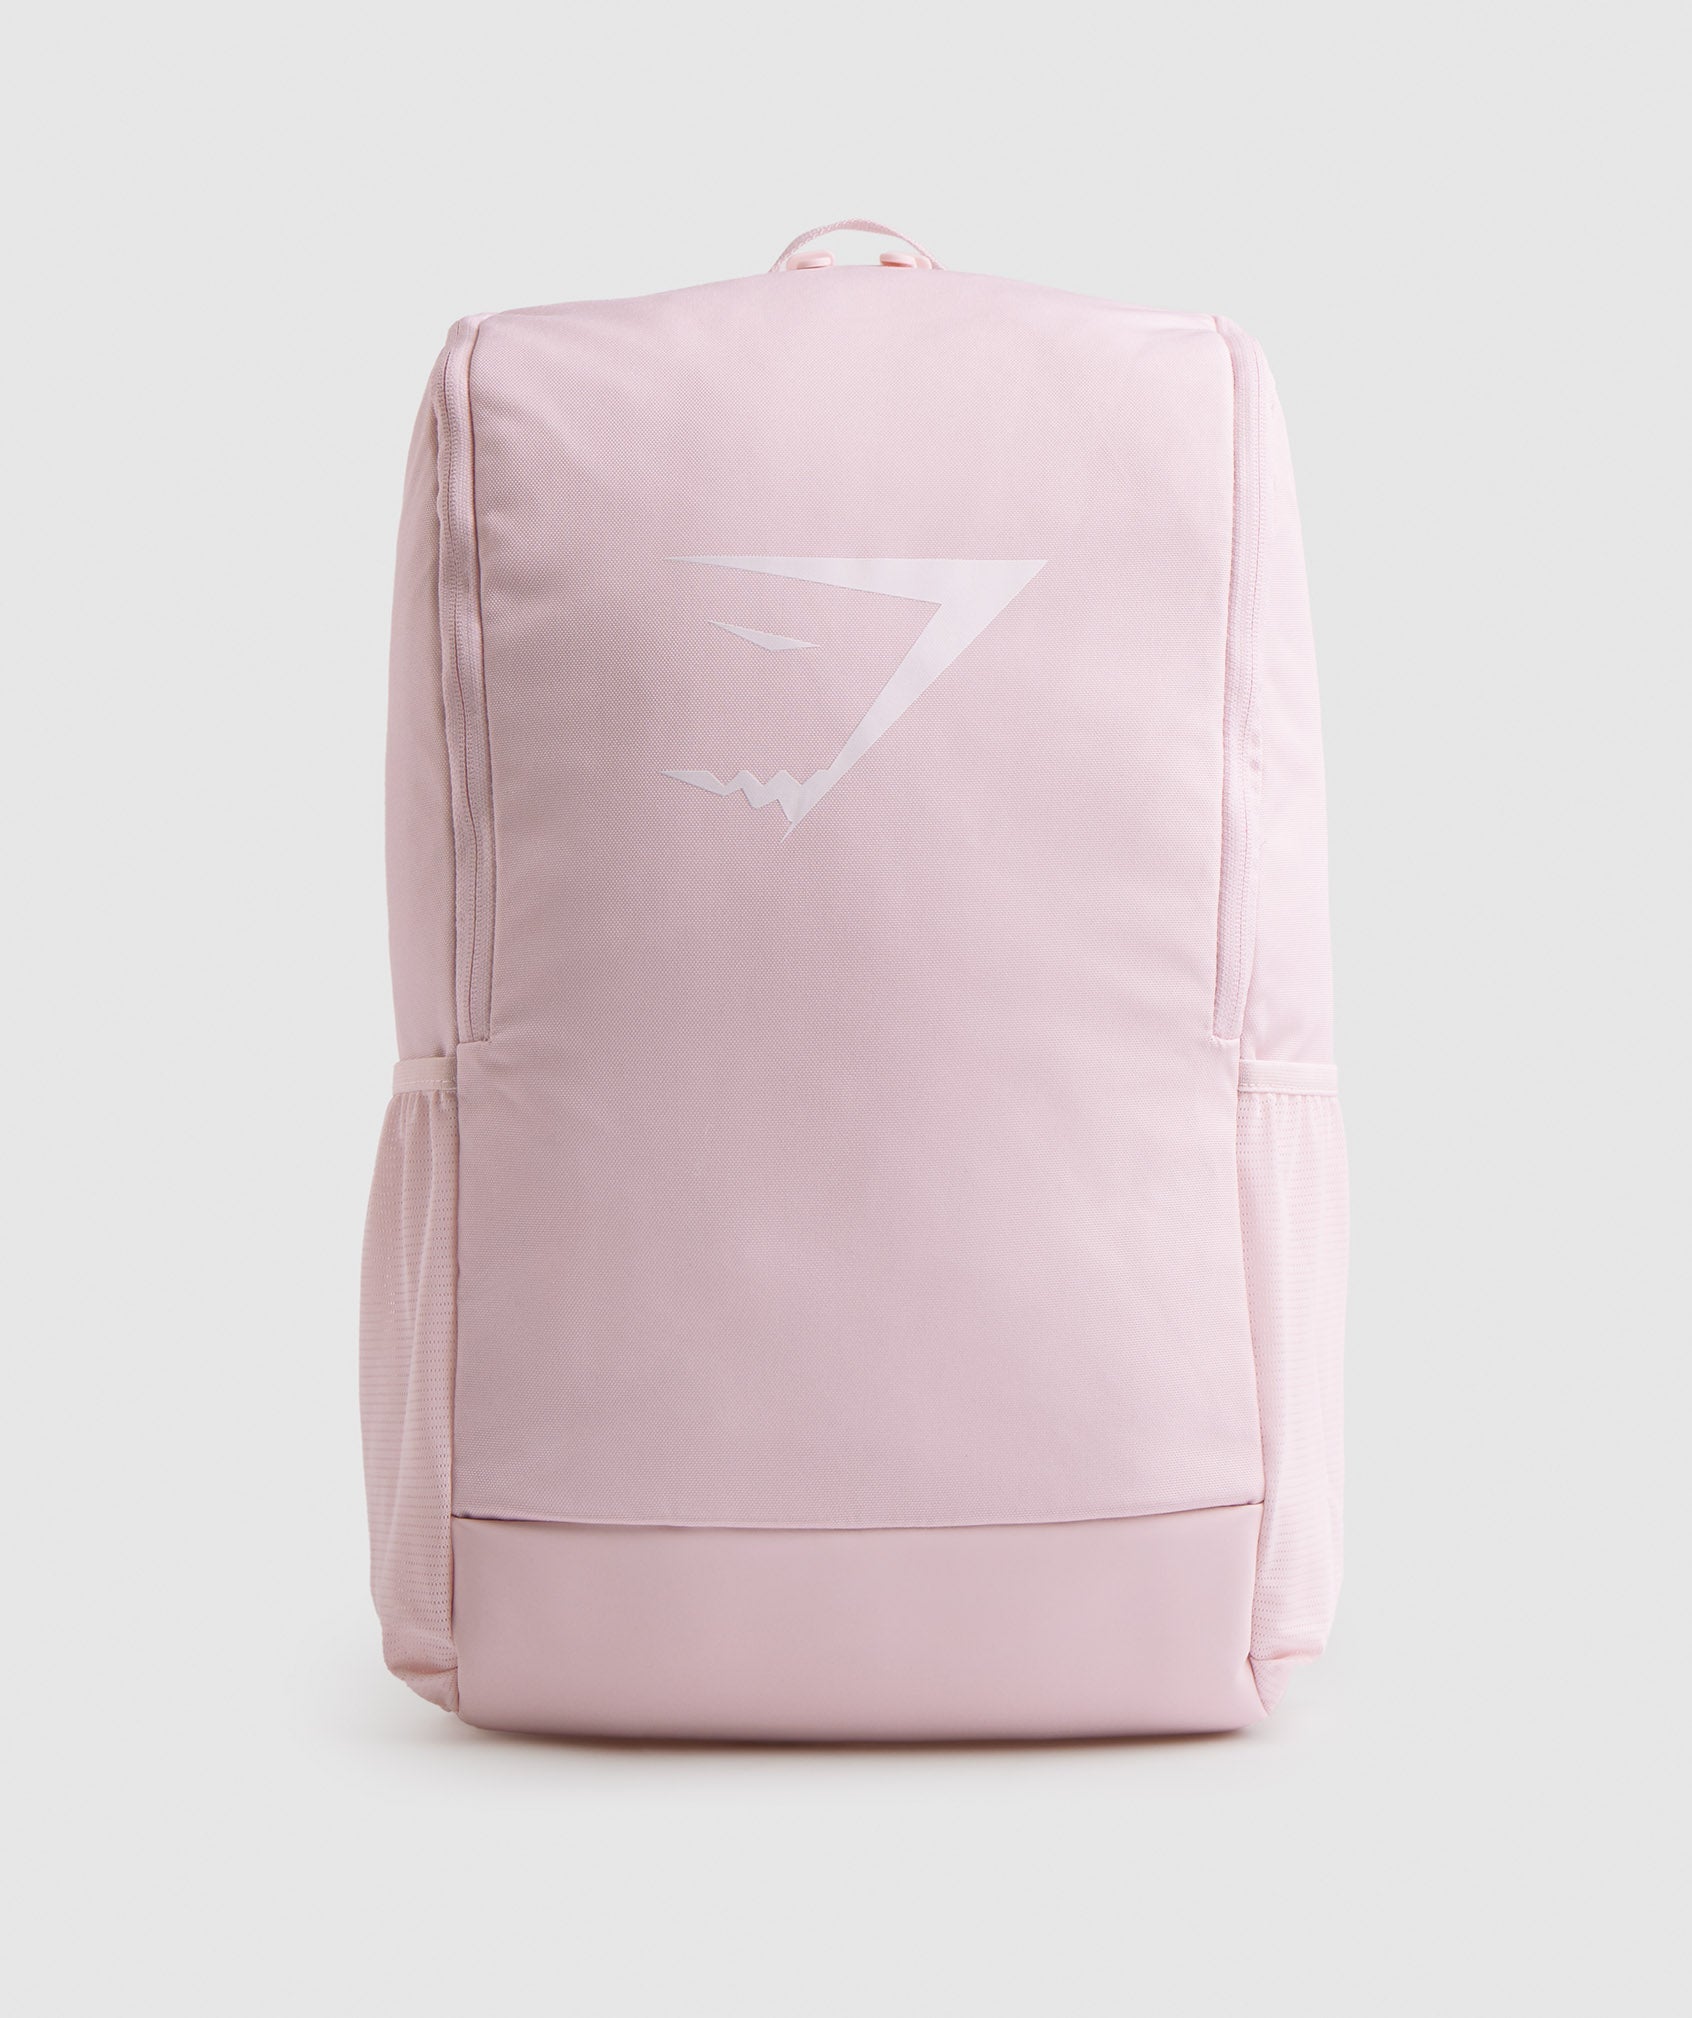 Sharkhead Backpack in Sweet Pink - view 1